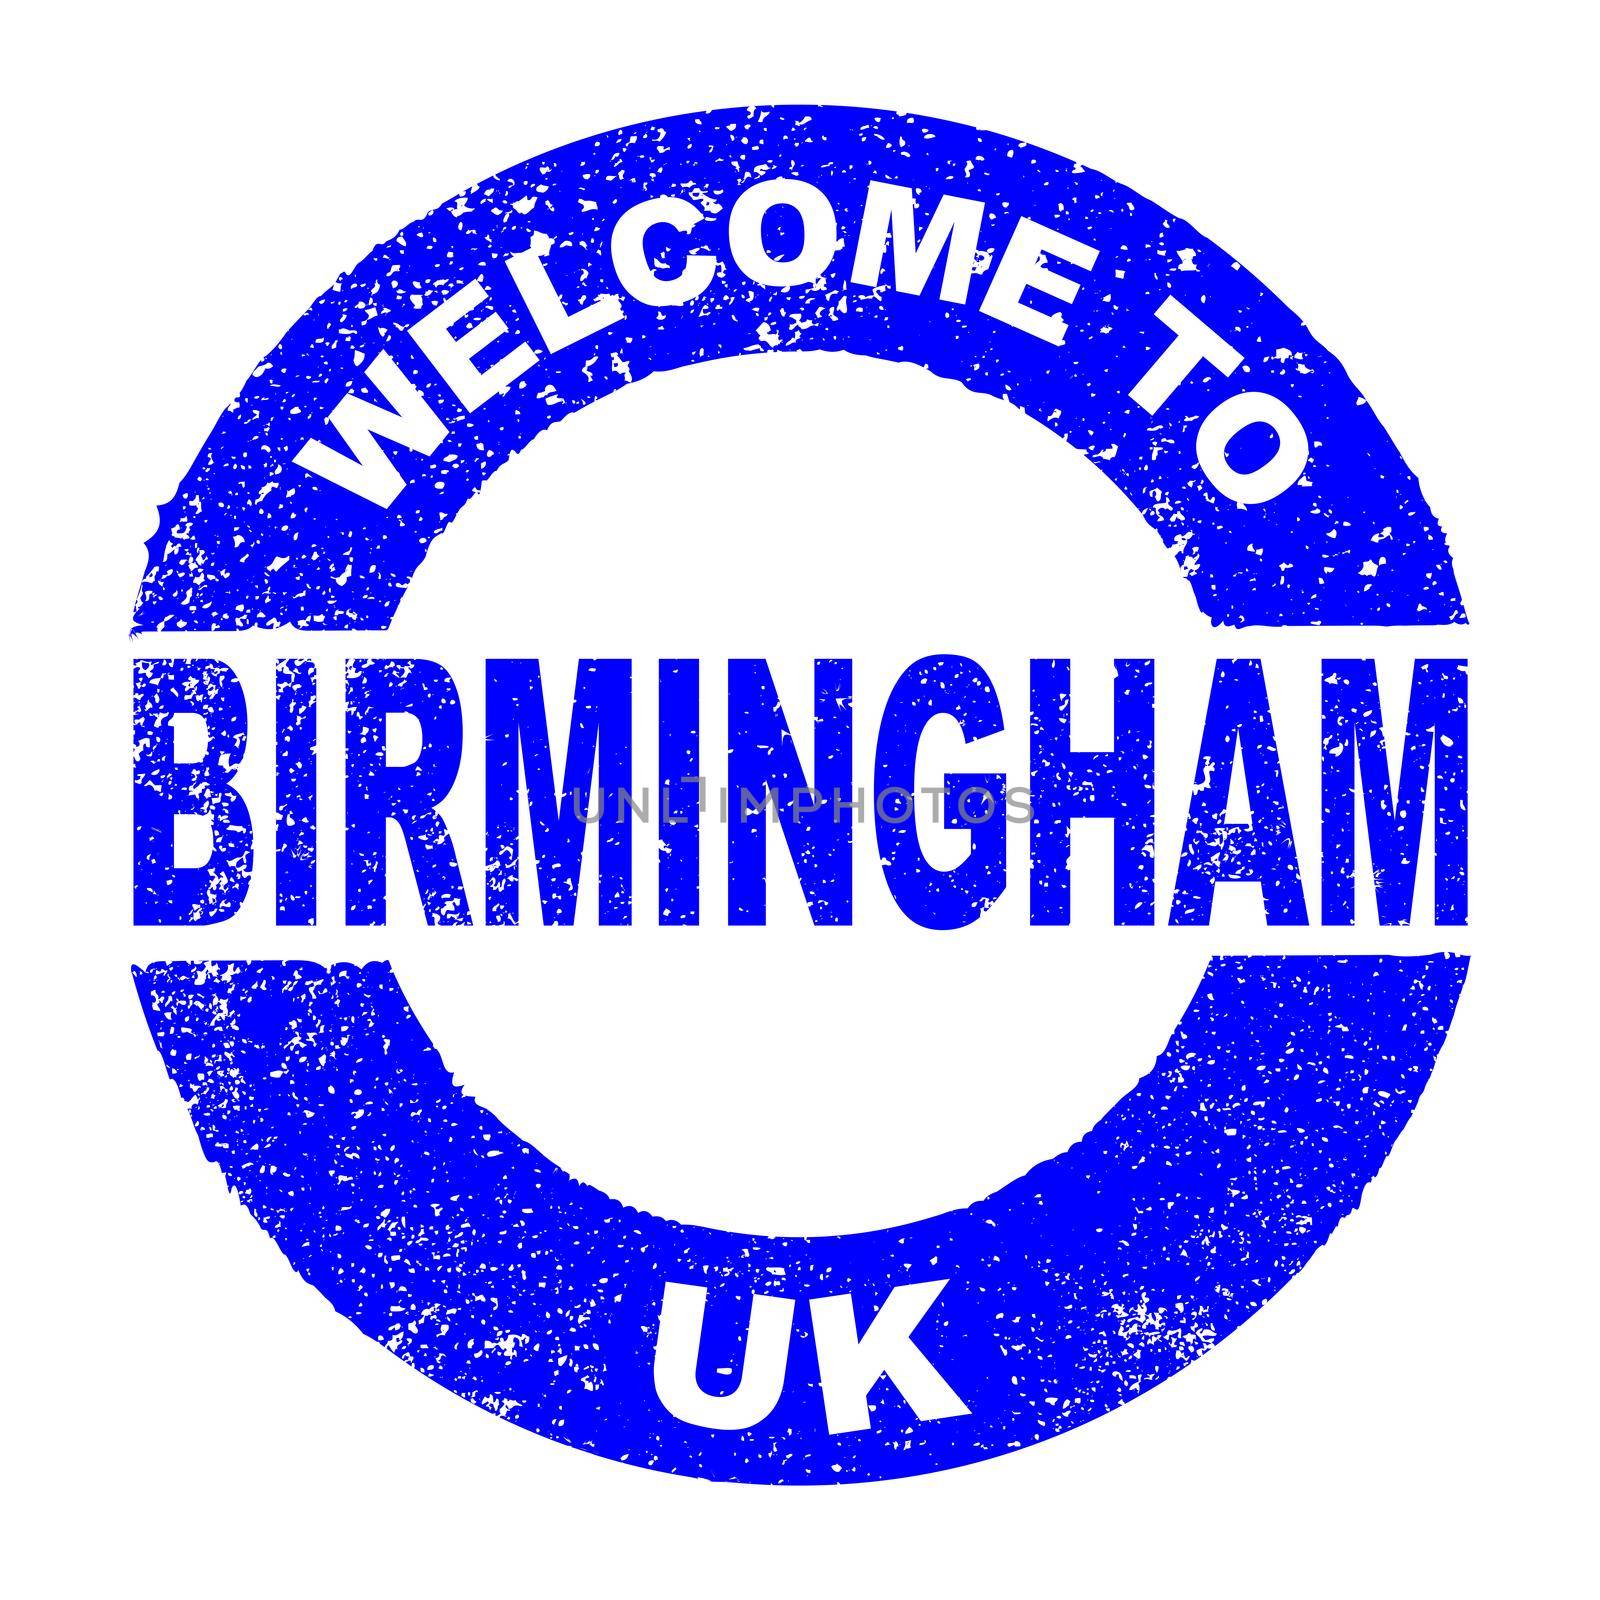 A grunge rubber ink stamp with the text Welcome To Birmingham UK over a white background